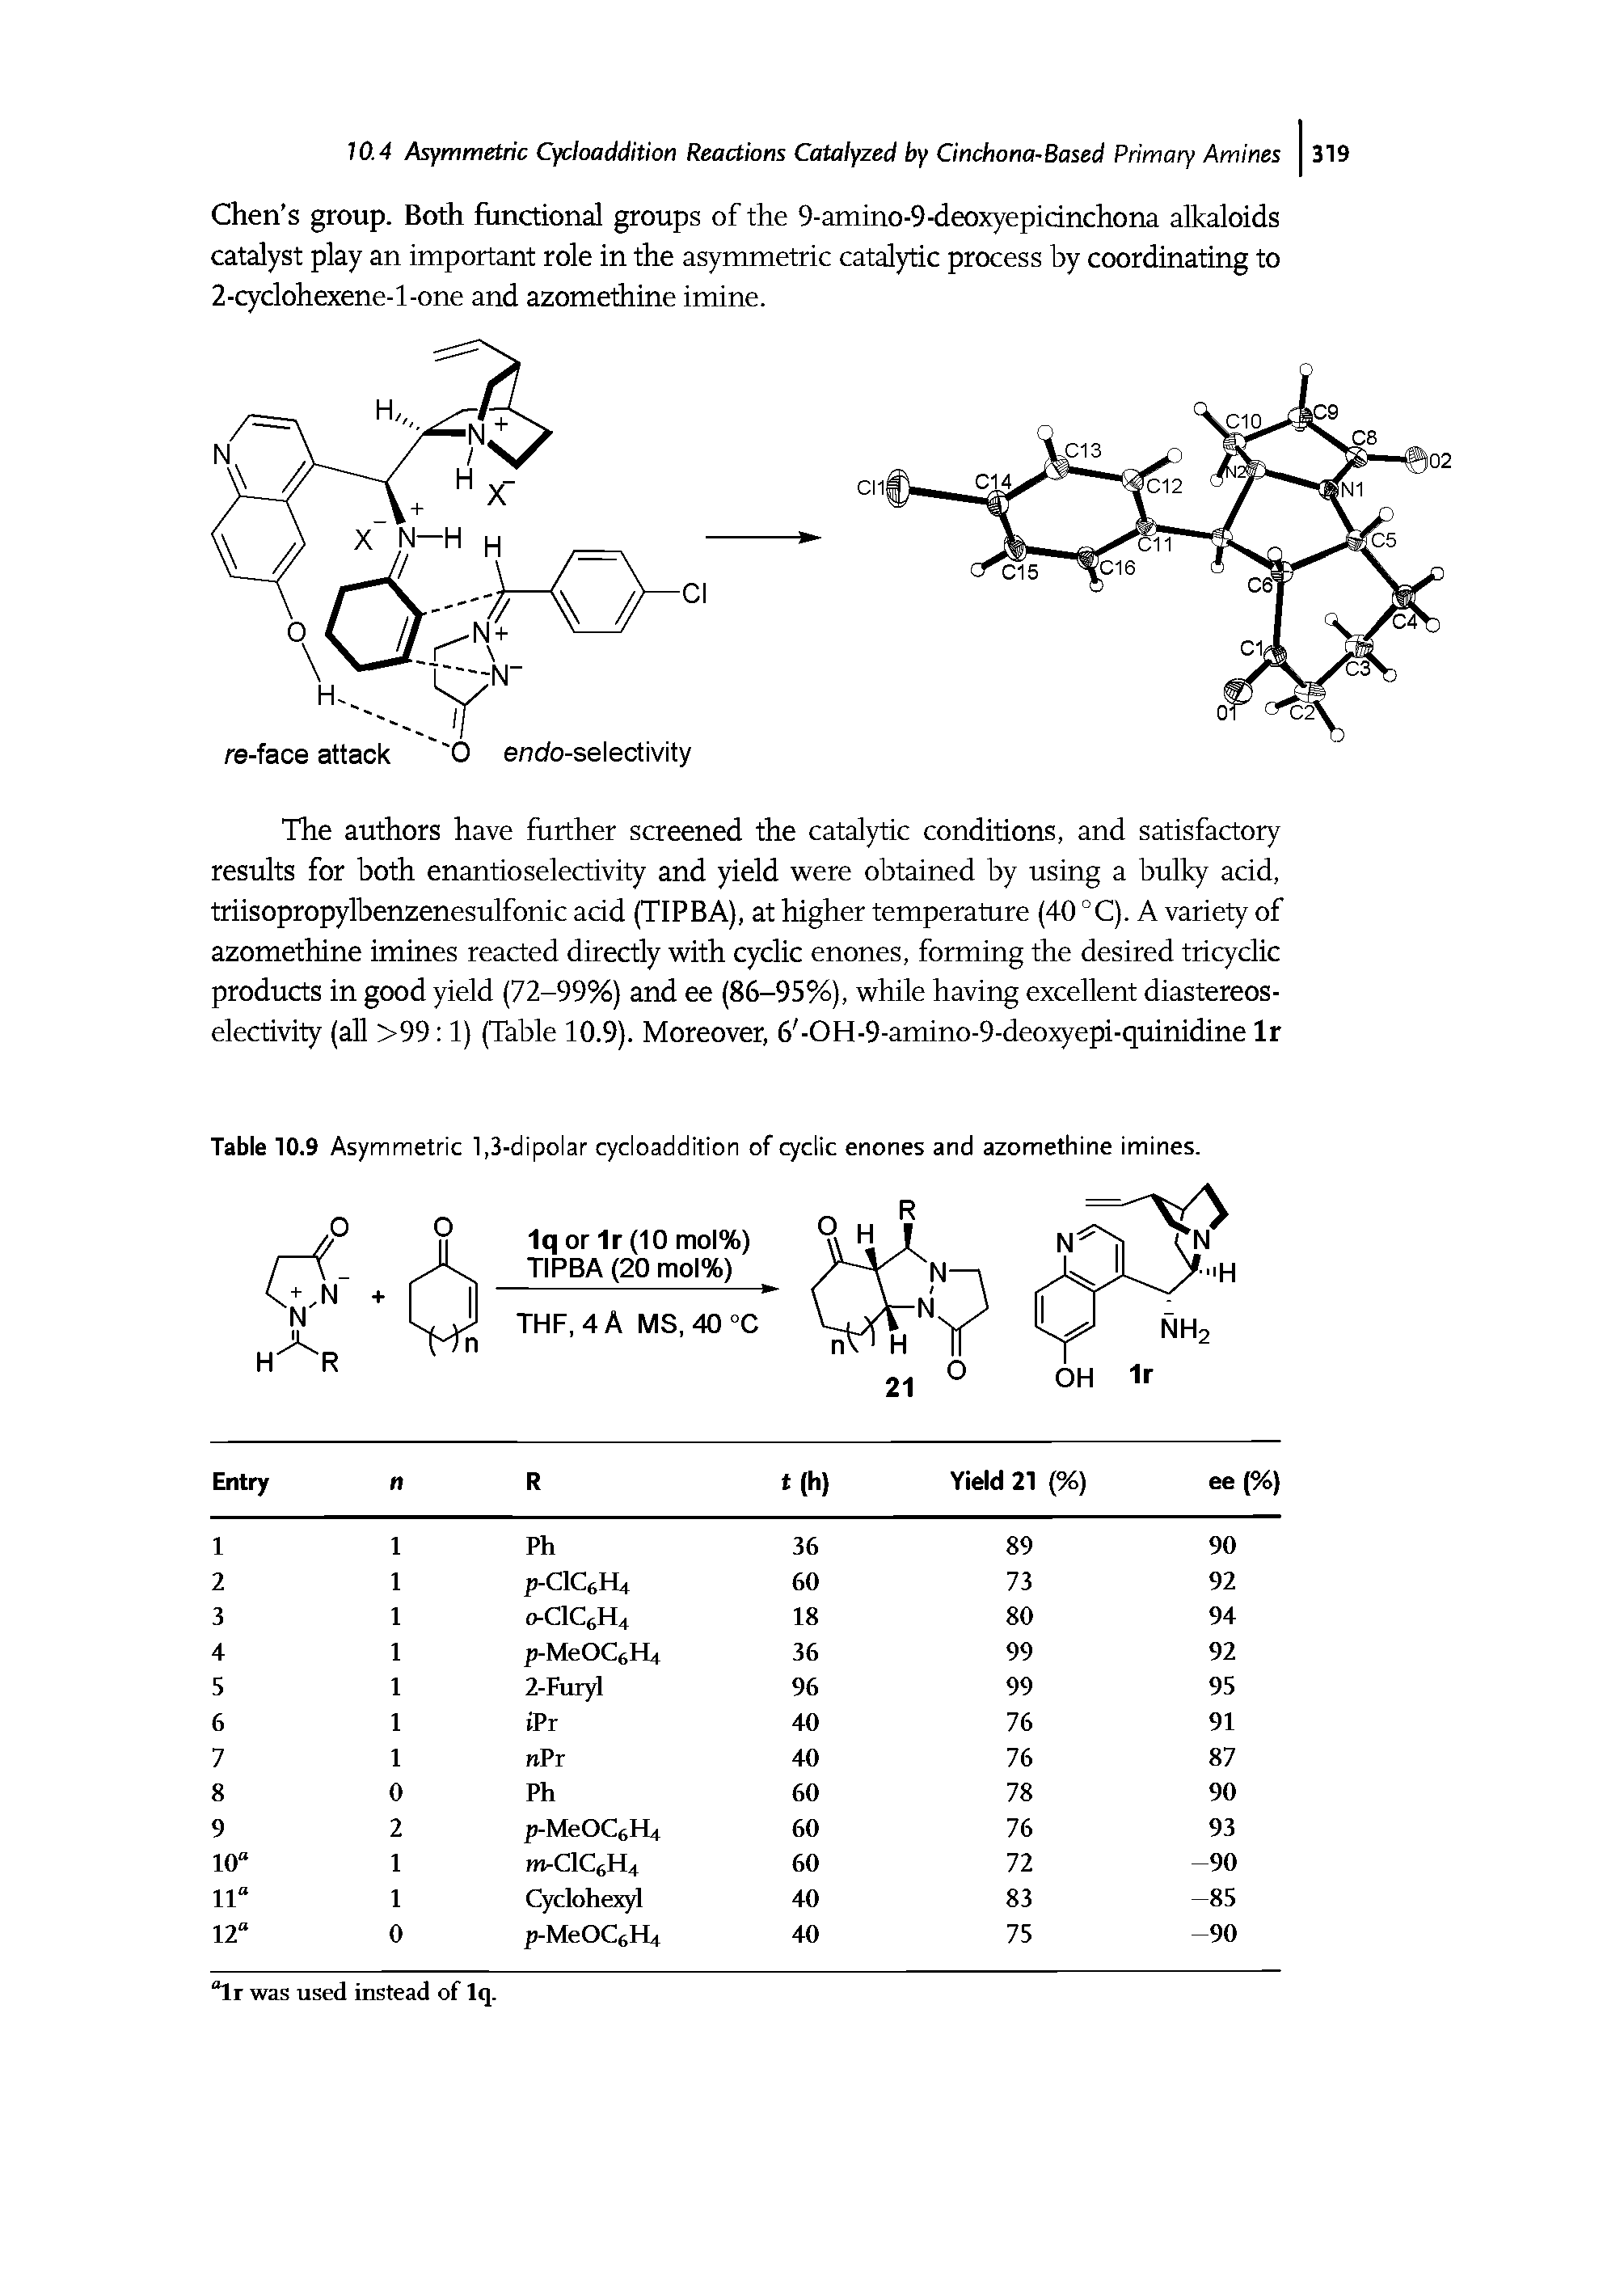 Table 10.9 Asymmetric 1,3-dipolar cycloaddition of cyclic enones and azomethine imines.